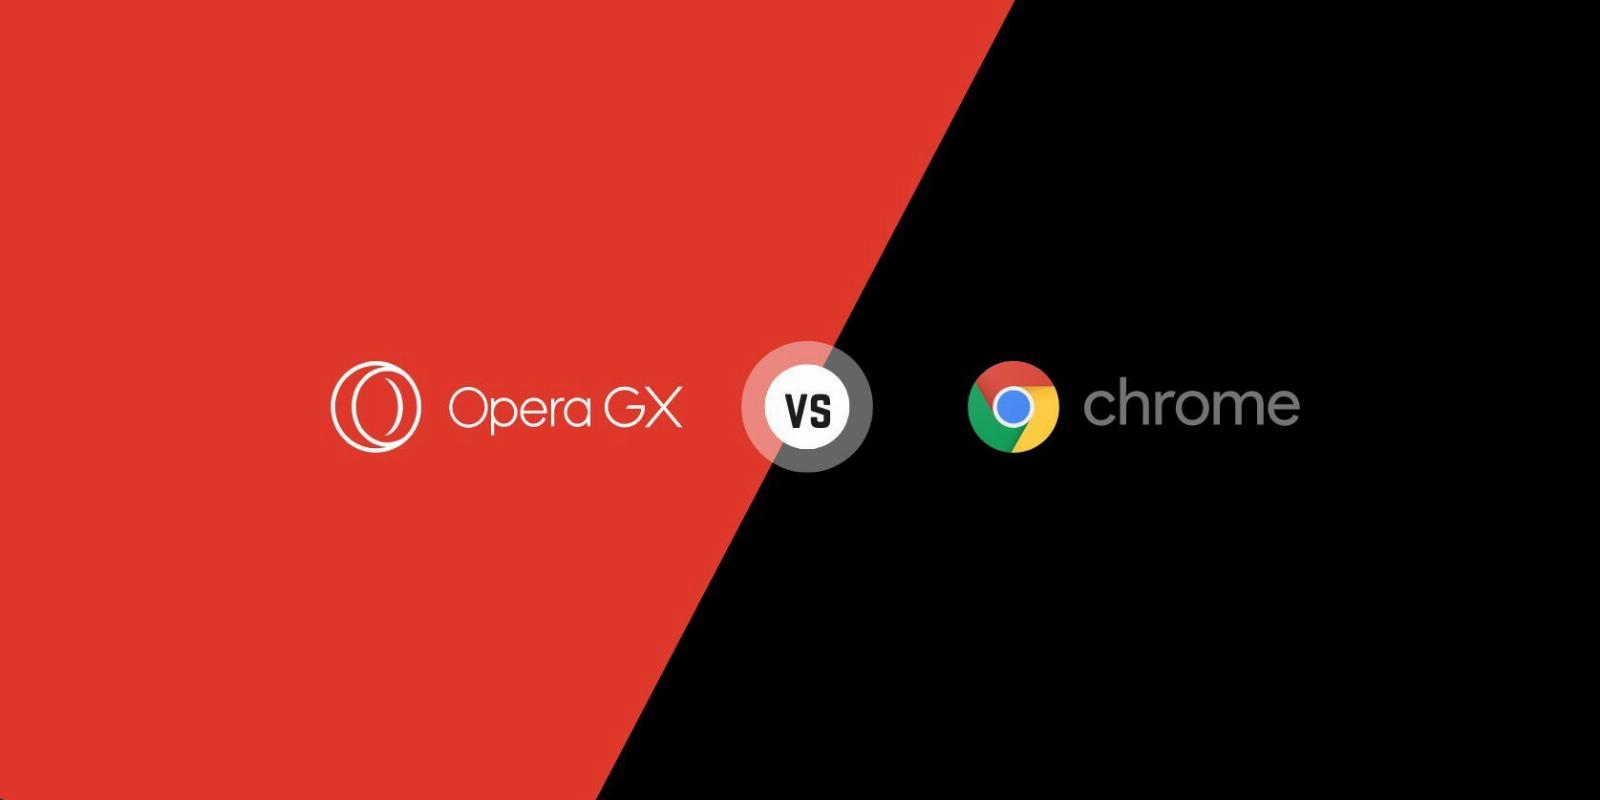 Opera GX vs. Chrome: Which Browser Is More Secure?